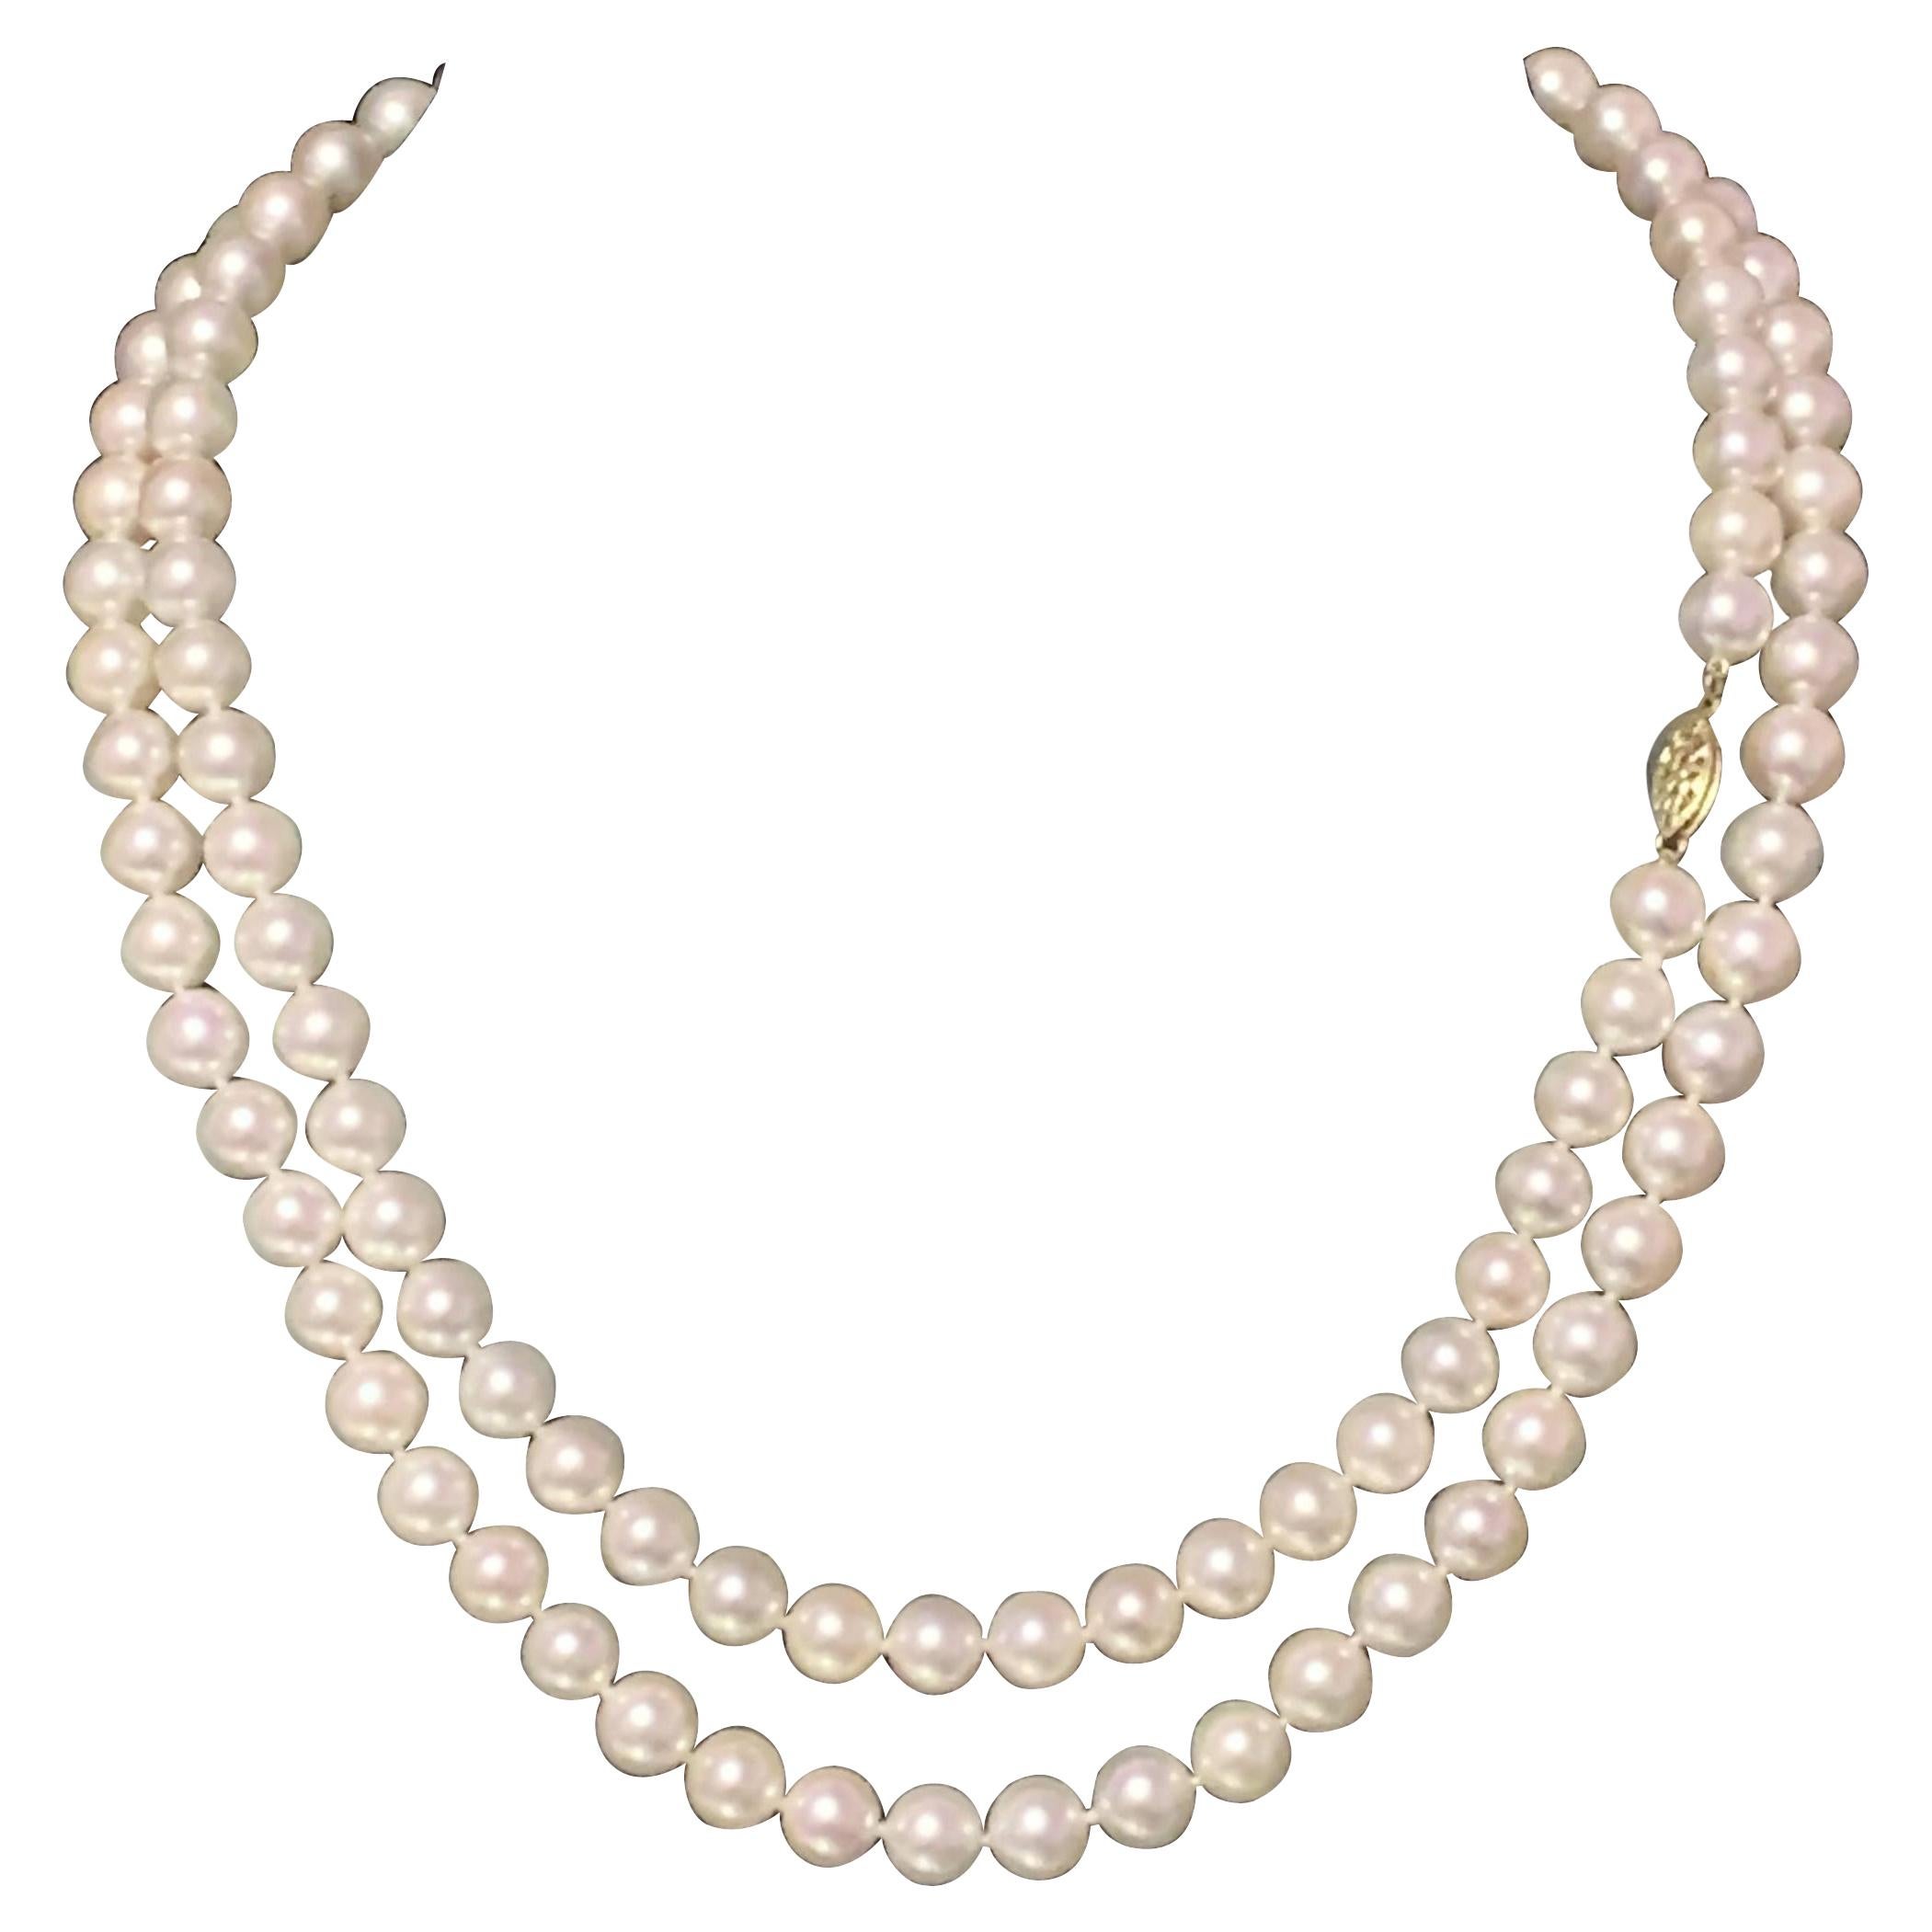 Akoya Pearl Necklace 14k Gold 34" 7.5 Mm Certified